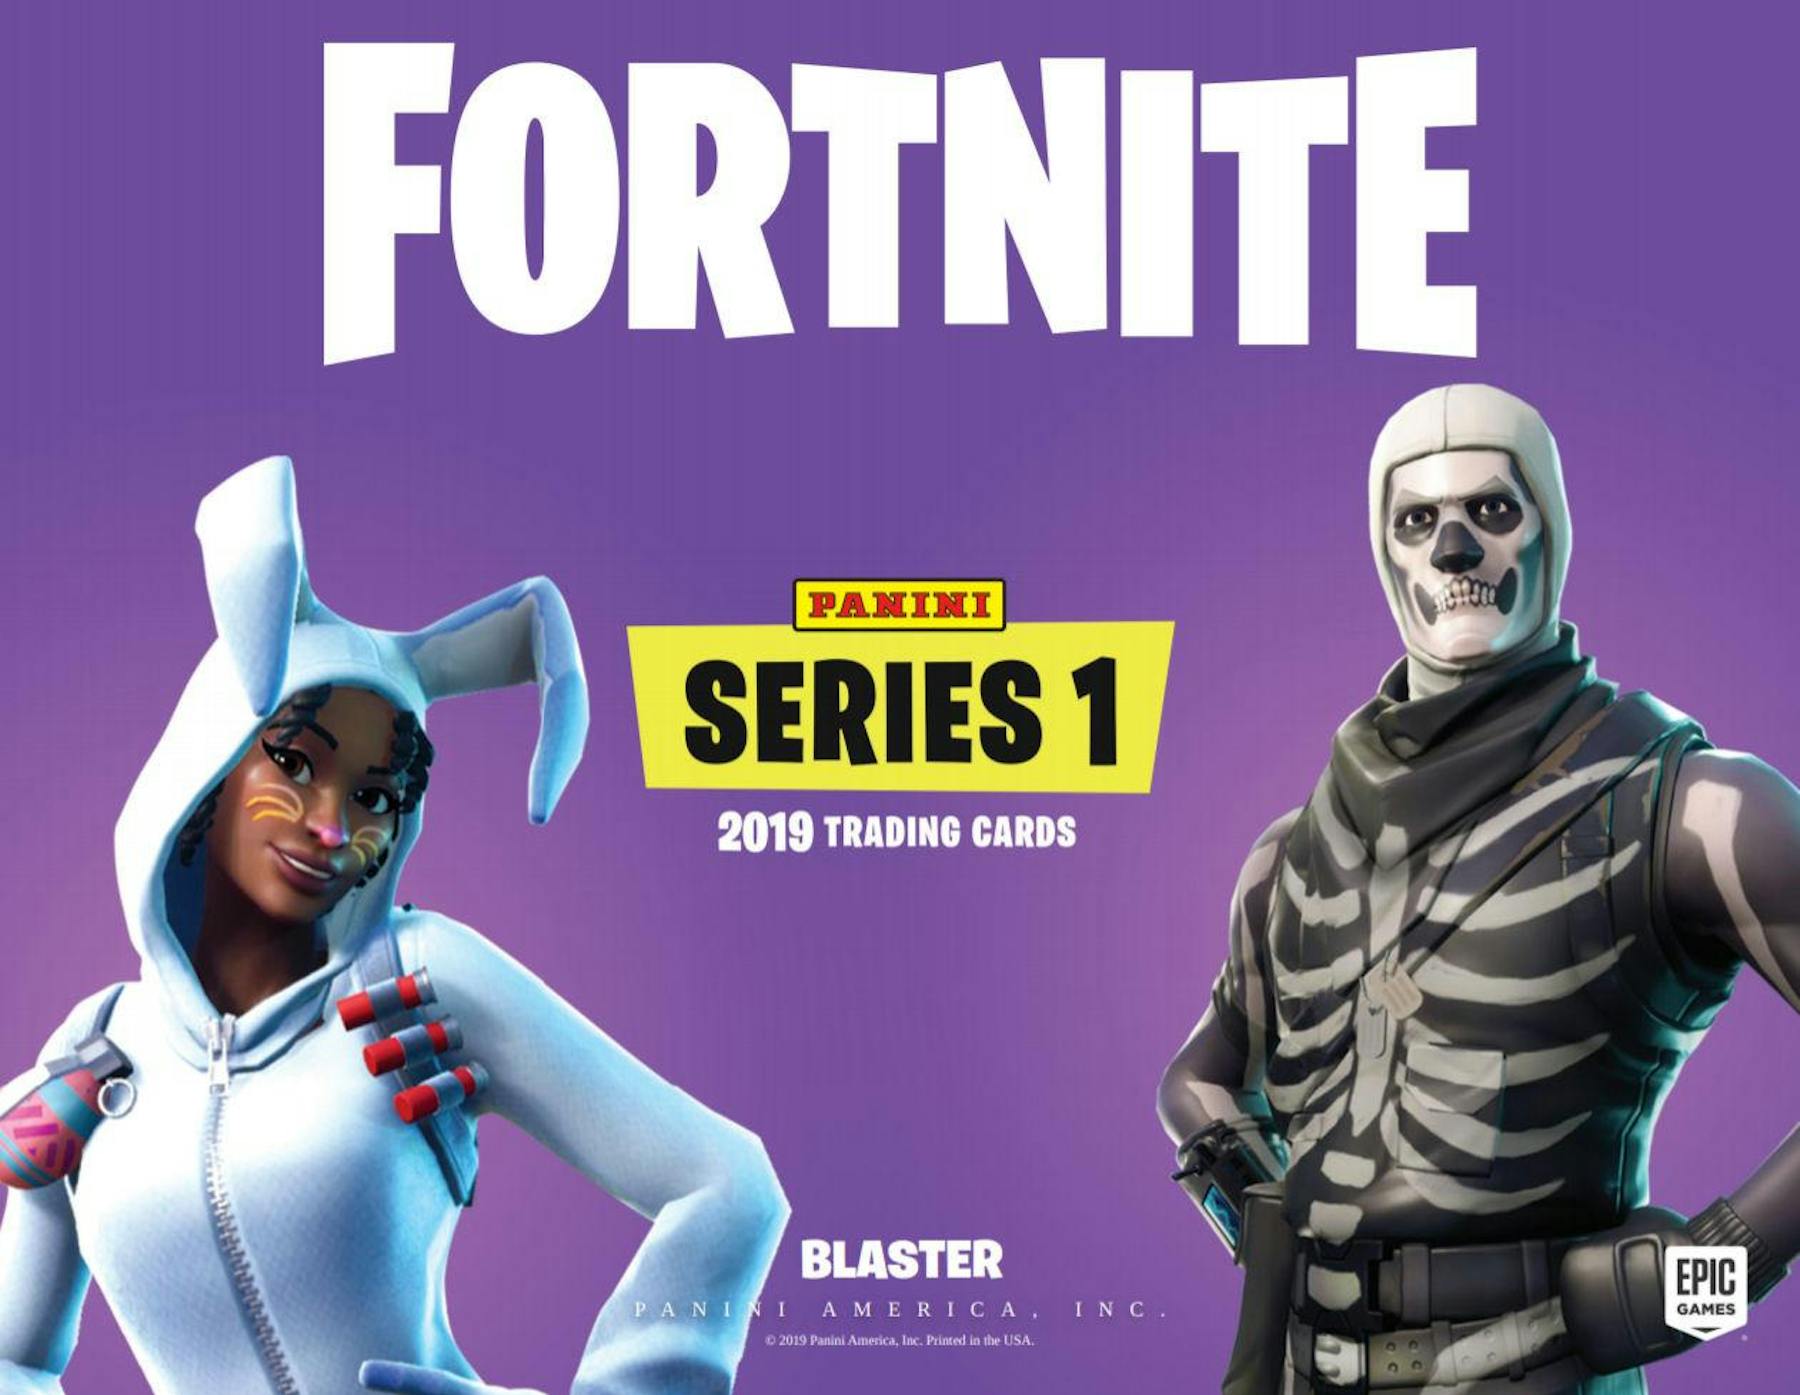 Fortnite Series 1 Trading Cards Blaster 20 Box Case Panini 2019 - shop our best deals